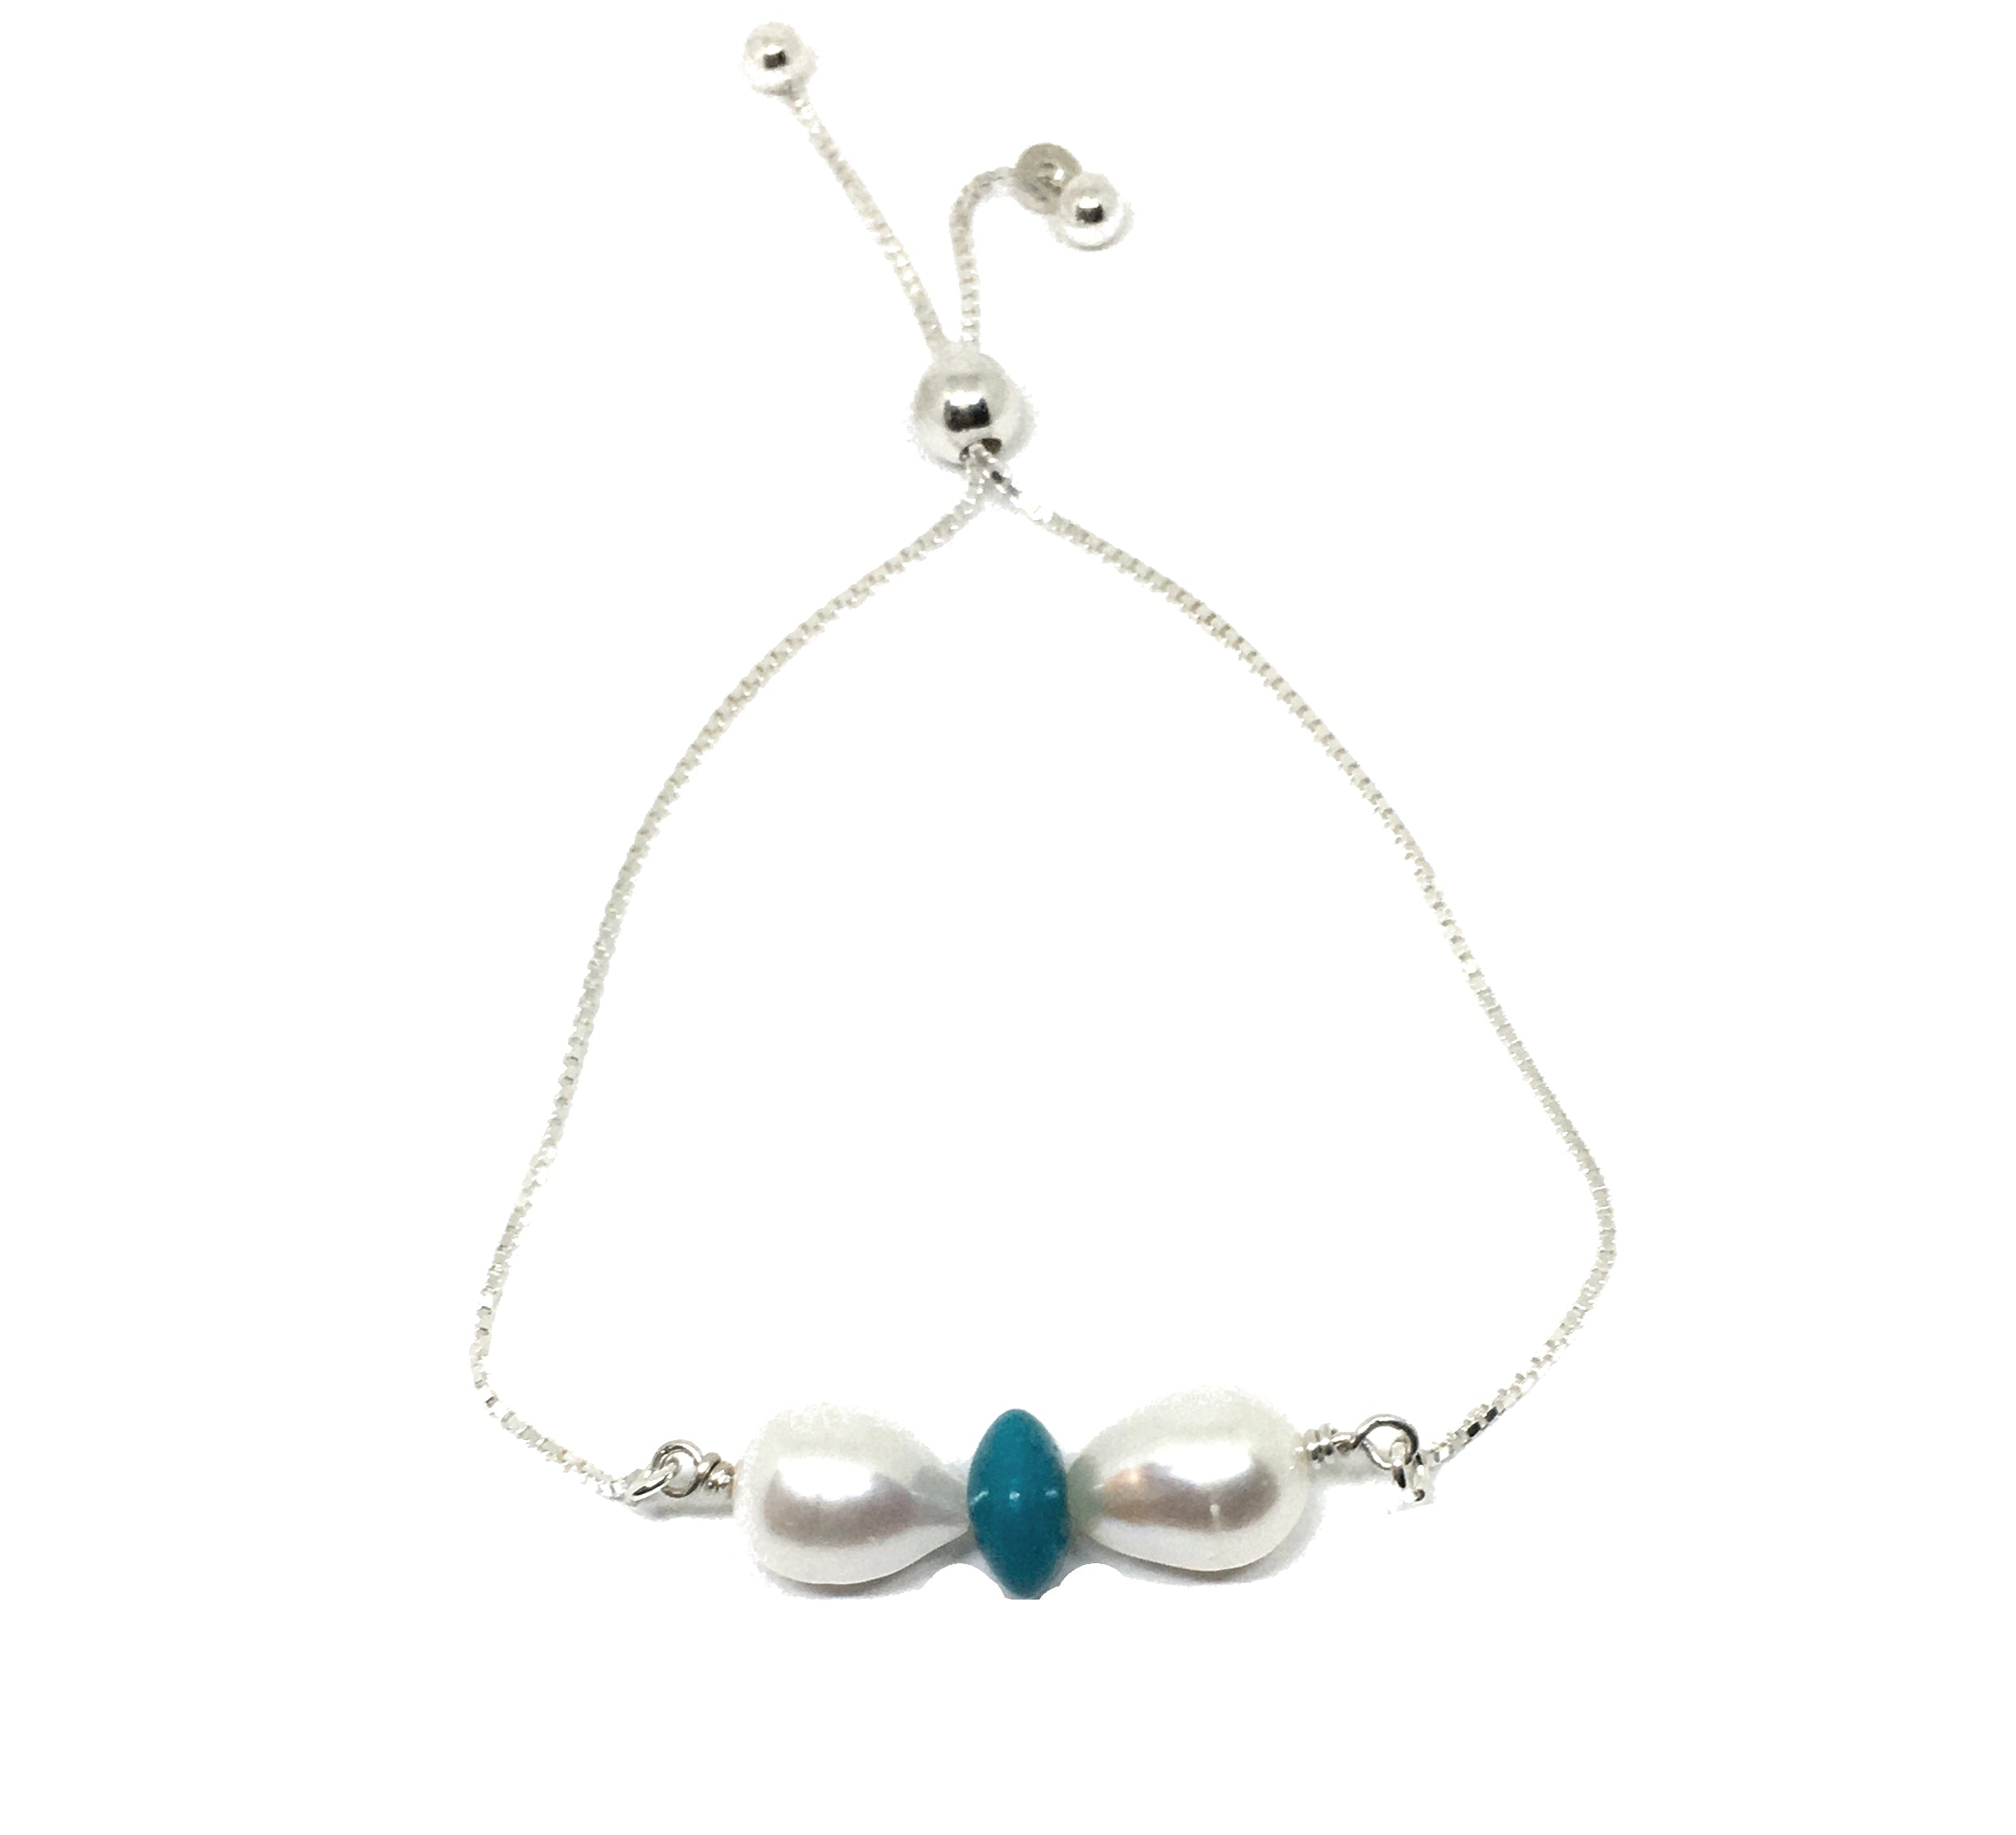 White Pearl and Turquoise Bolo Bracelet in Sterling Silver